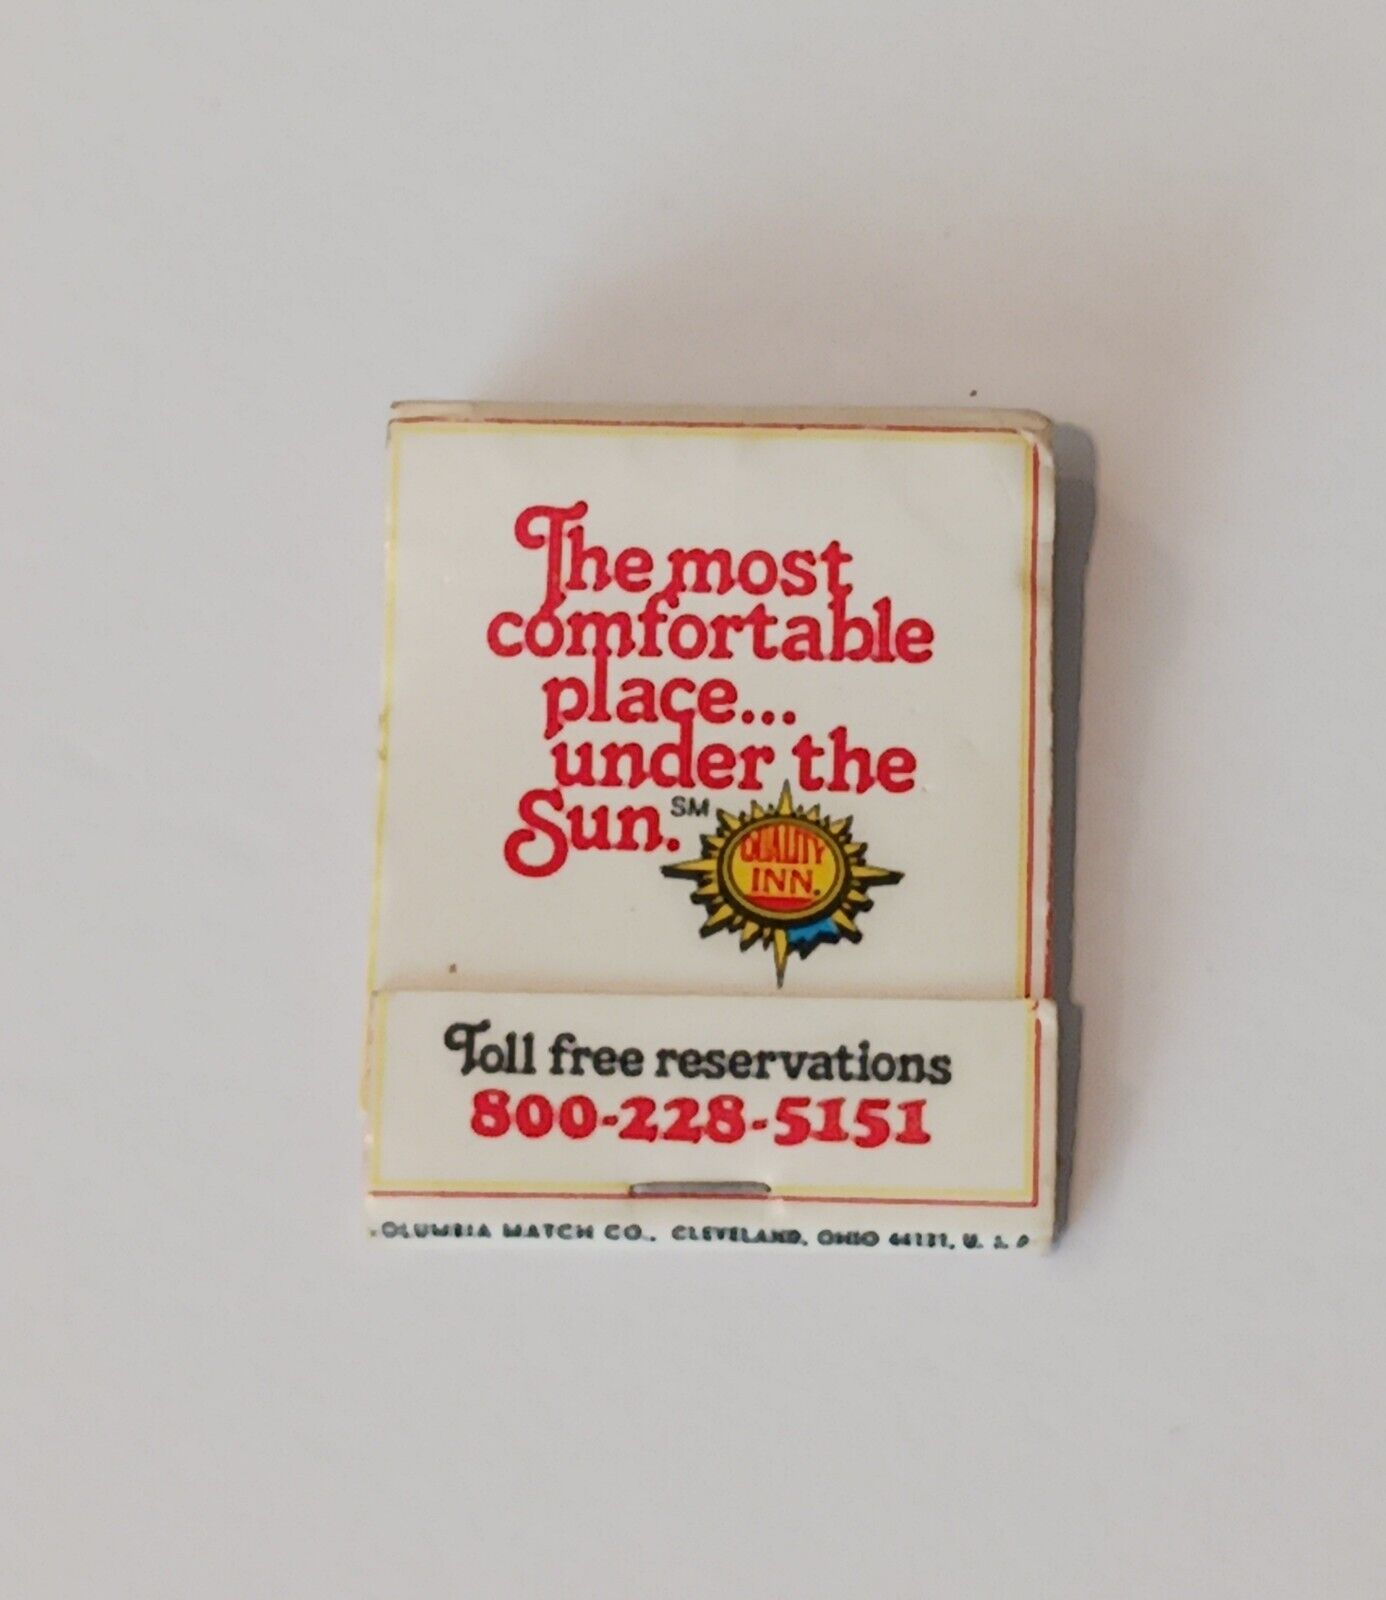 Vintage Matchbook Quality Inn The Most Comfortable Place Under The Sun Logo